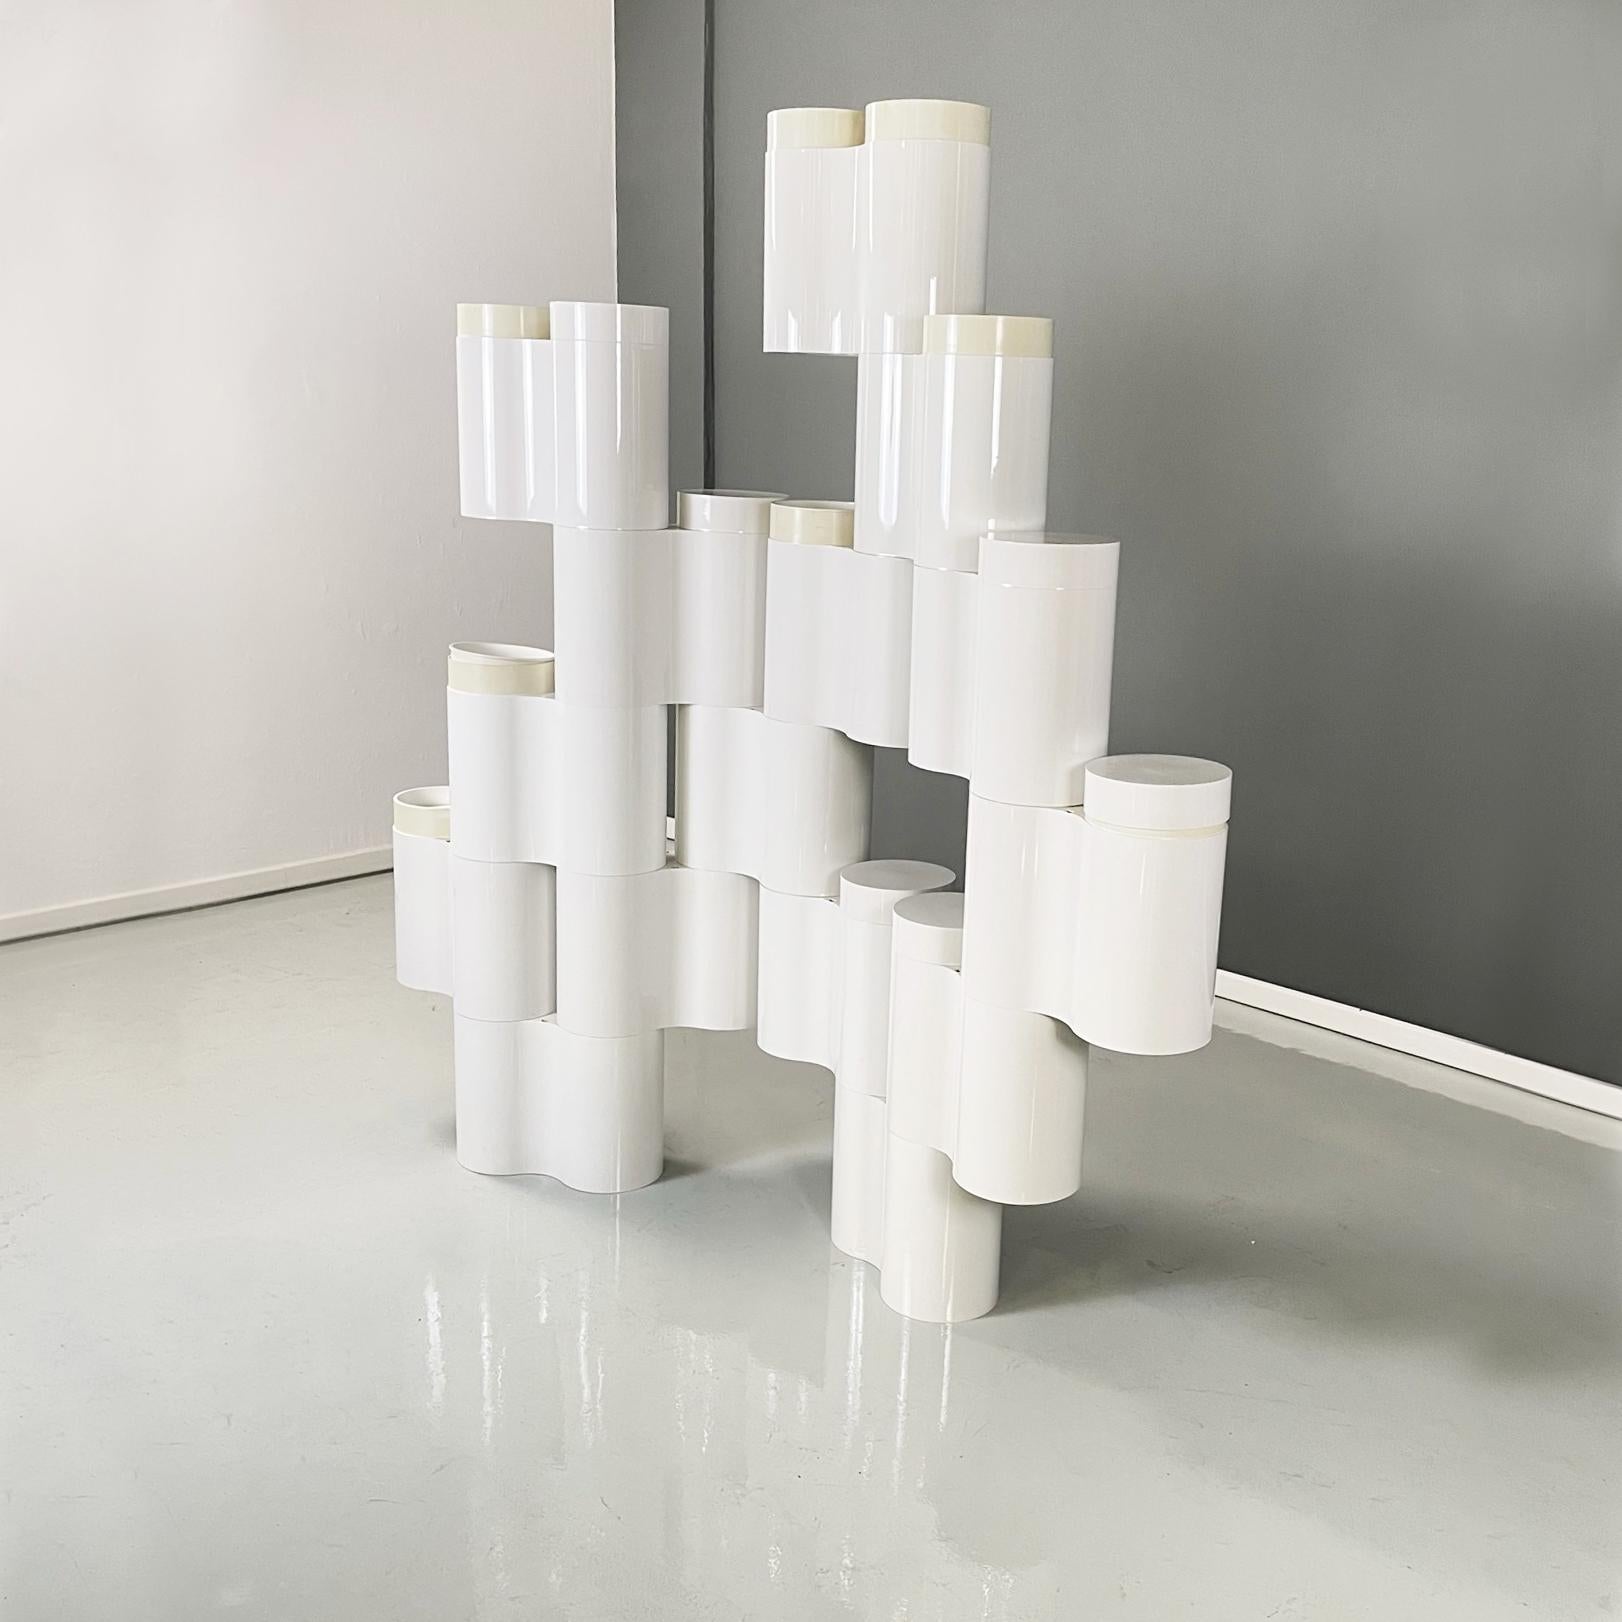 Italian modern Modular equipped wall mod. Fiocco by Pierluigi Spadolini for Kartell, 1970s
Rare modular equipped wall mod. Fiocco in white plastic. Consisting of 15 modules and 11 round top caps, which can be positioned as desired. Each module